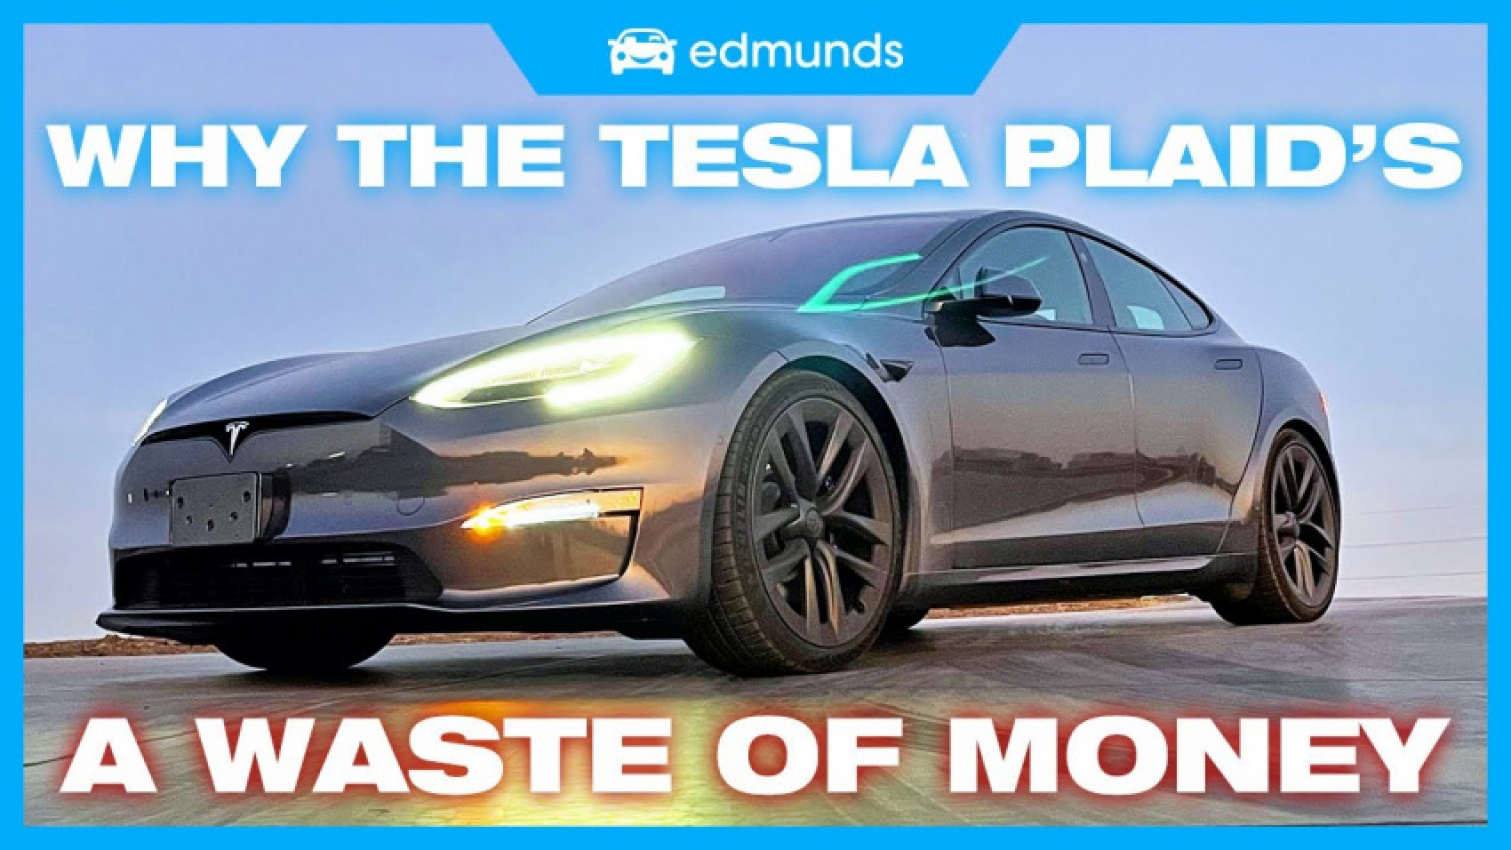 autos, cars, tesla, 2021 electric cars, 2021 tesla model s, all electric cars, best electric cars, best electric cars 2021, electric cars, electric cars 2021, fastest electric car, fastest tesla, fully electric cars, luxury electric cars, luxury sedans, model s tesla, new electric cars, new tesla model s, tesla family model, tesla model s, tesla model s 0-60, tesla model s 2021, tesla model s interior, tesla model s plaid, tesla model s price, tesla model s range, tesla model s refresh, top electric cars, 2021 tesla model s plaid review | our full instrumented test | price, range, 0-60 & more